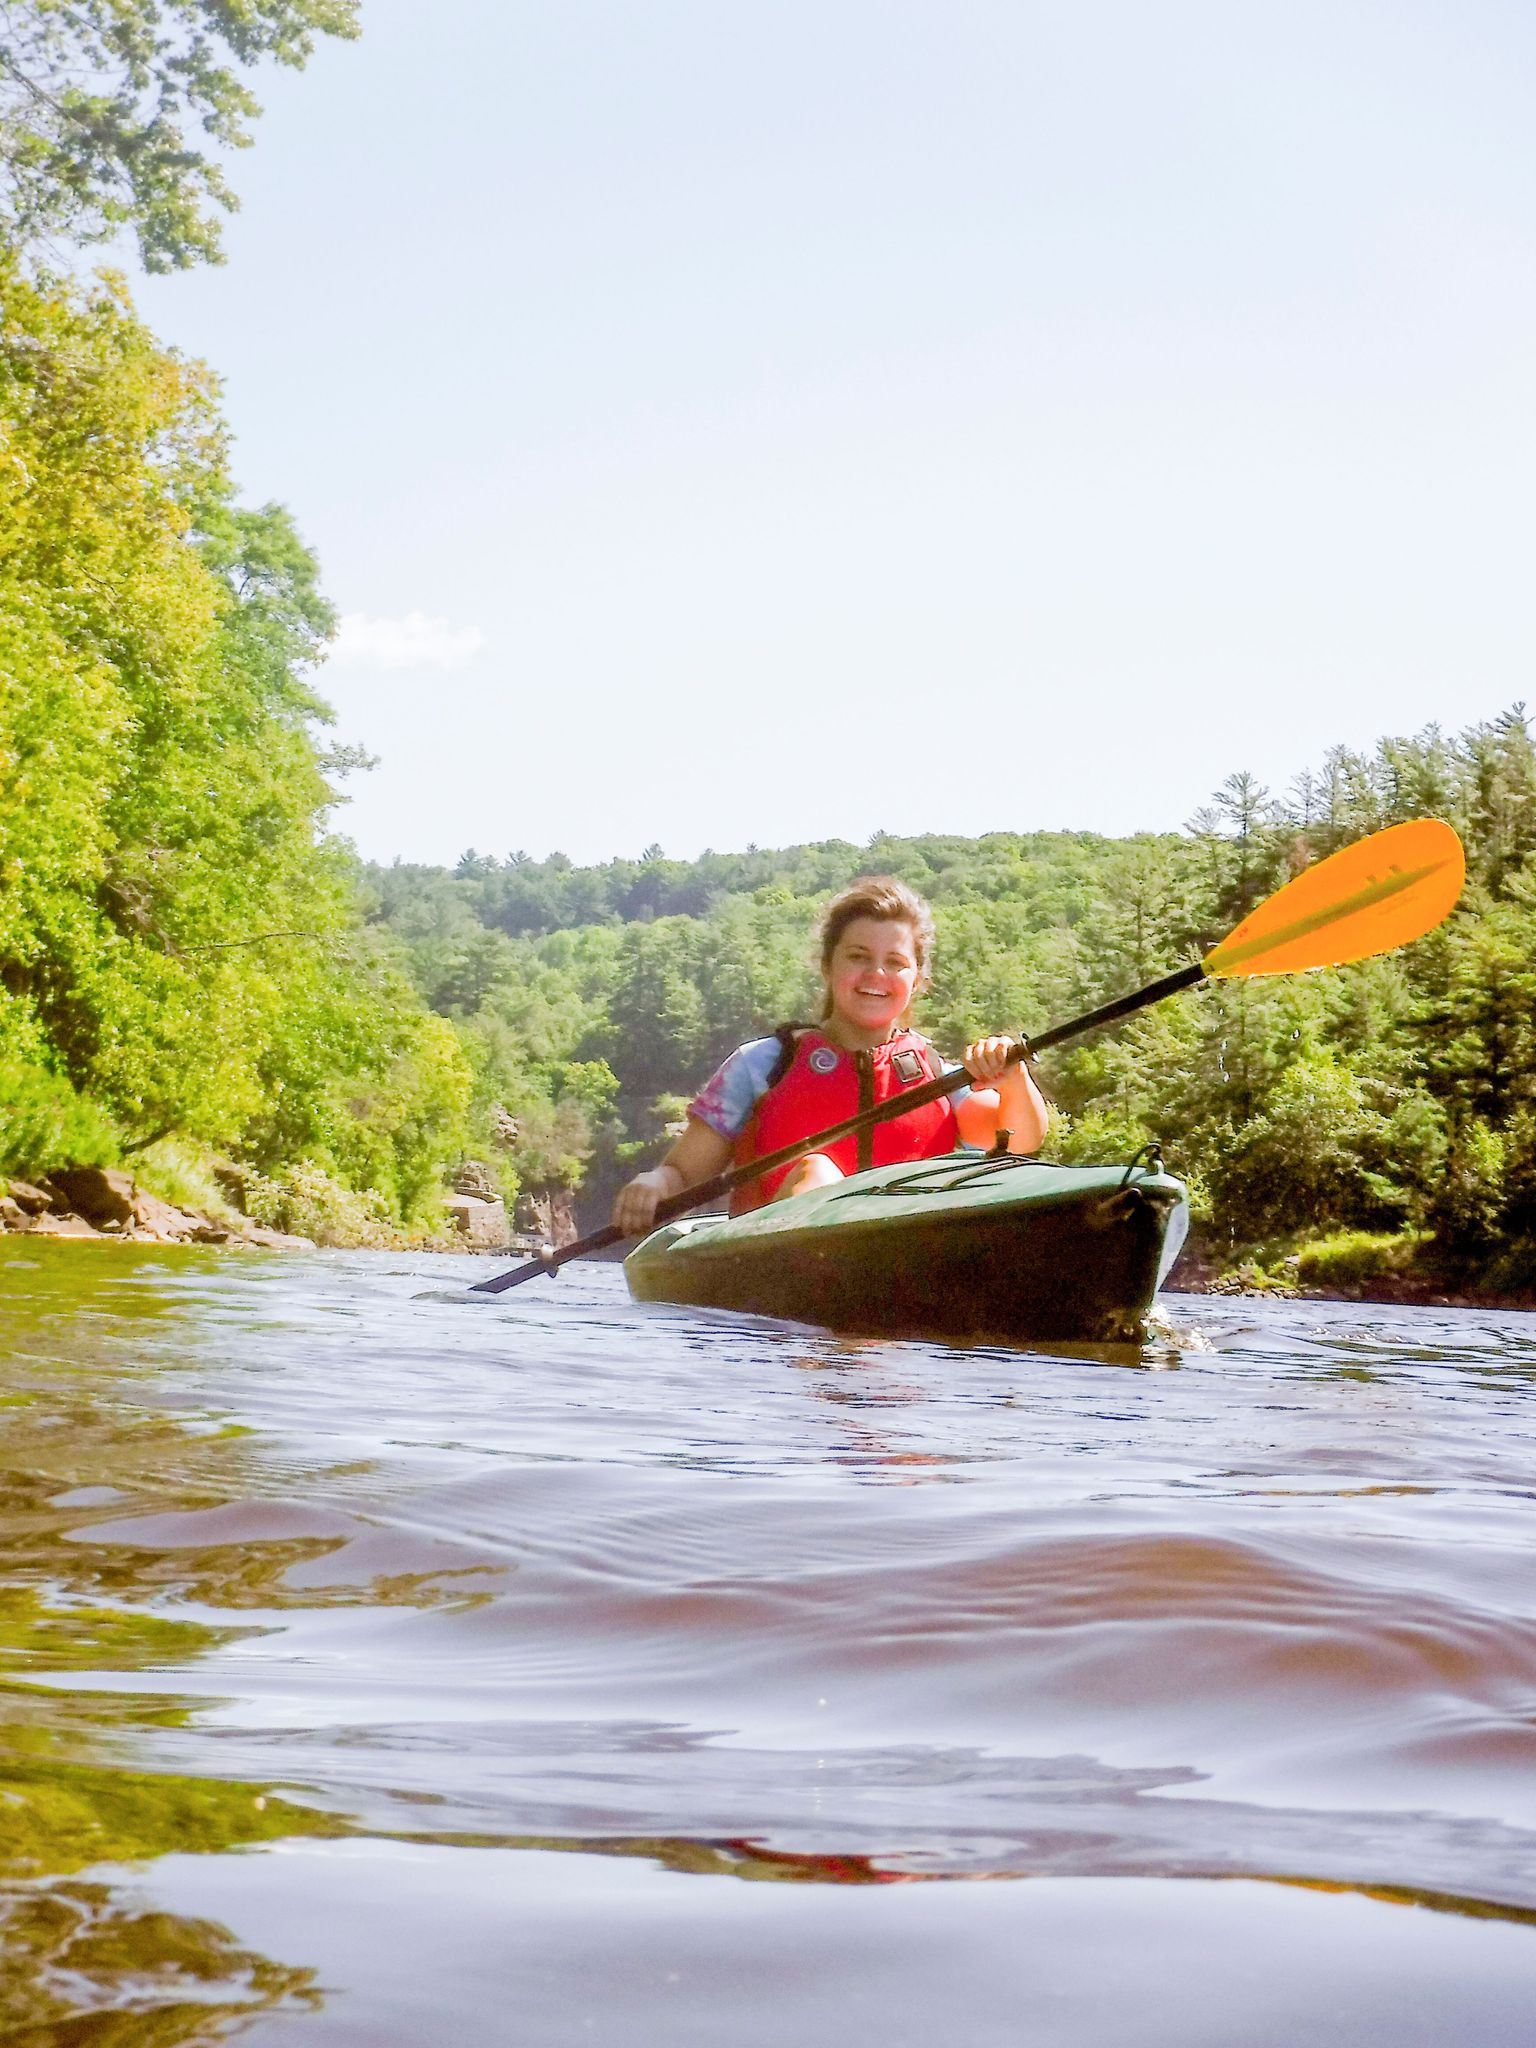 Paddling is an excellent way to experience the St. Croix National Scenic Riverway.